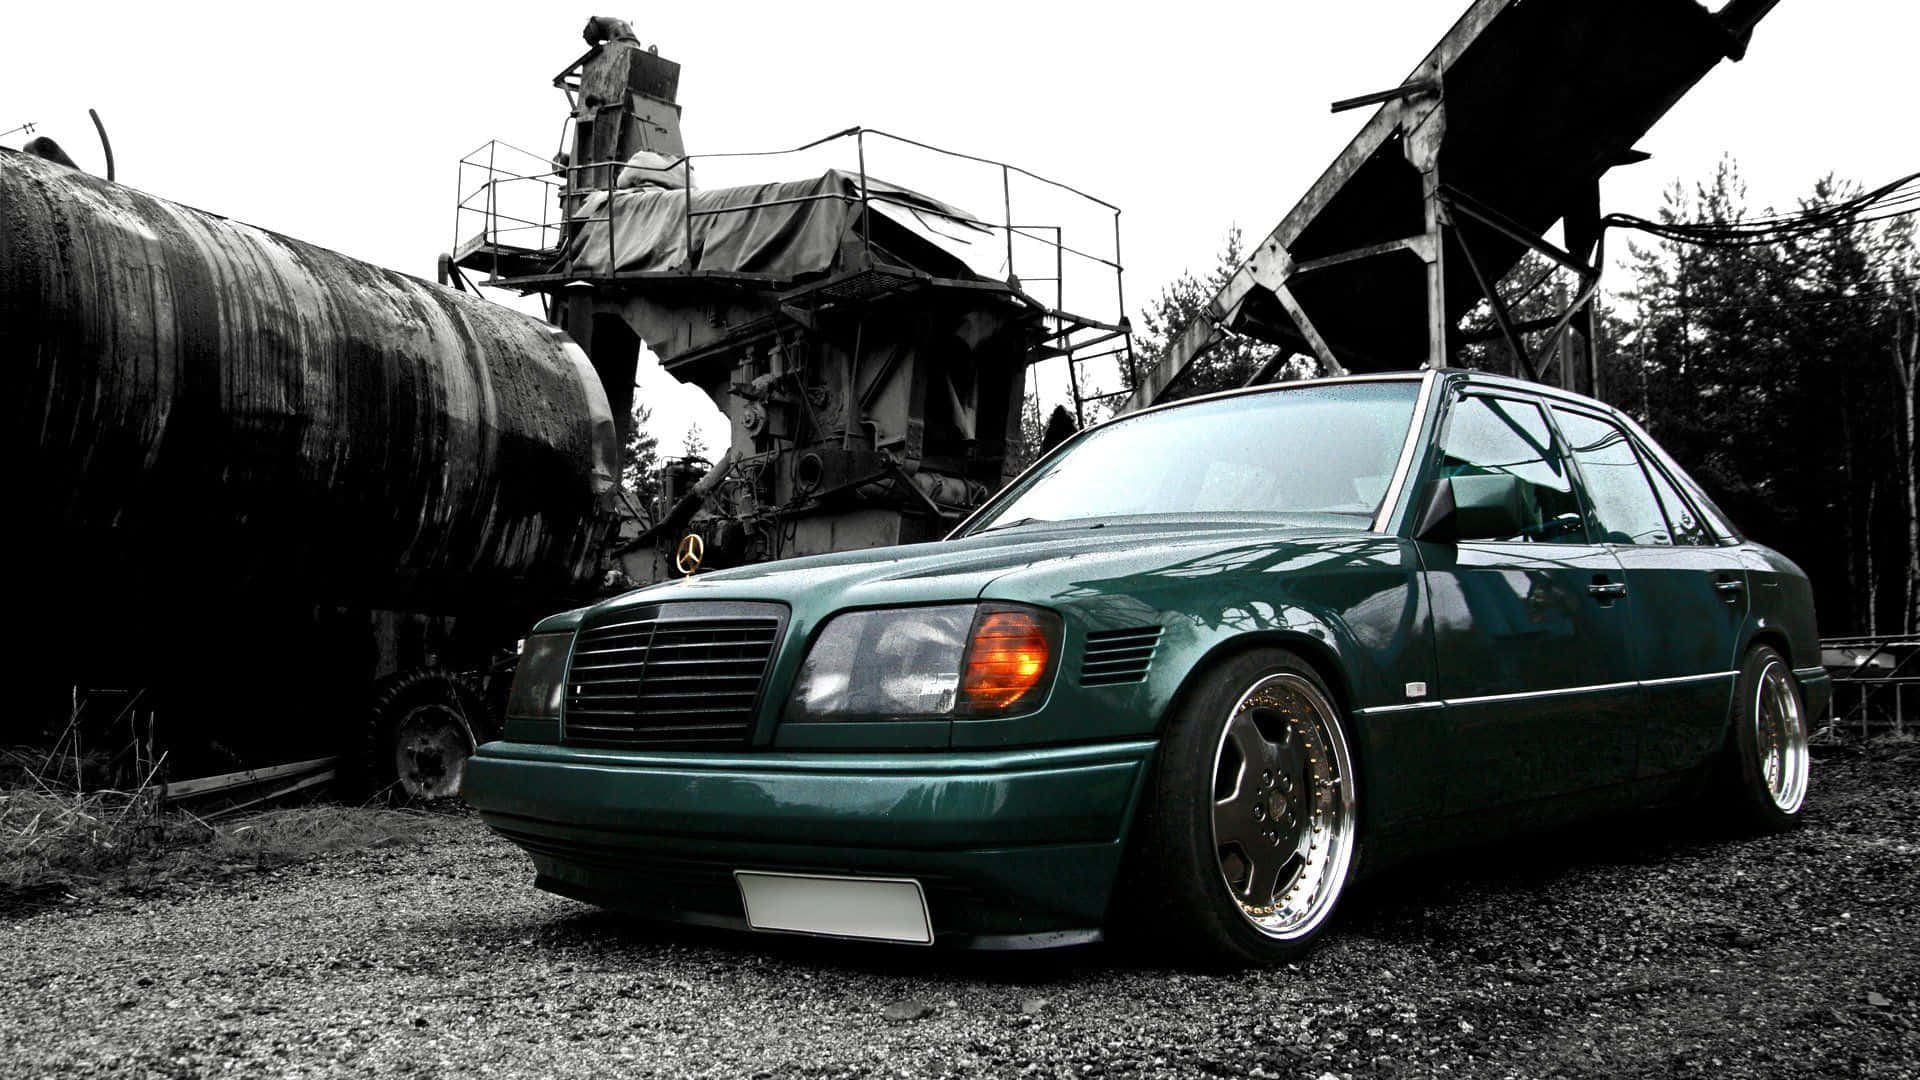 Classic in Time - Old Mercedes Benz Wallpaper